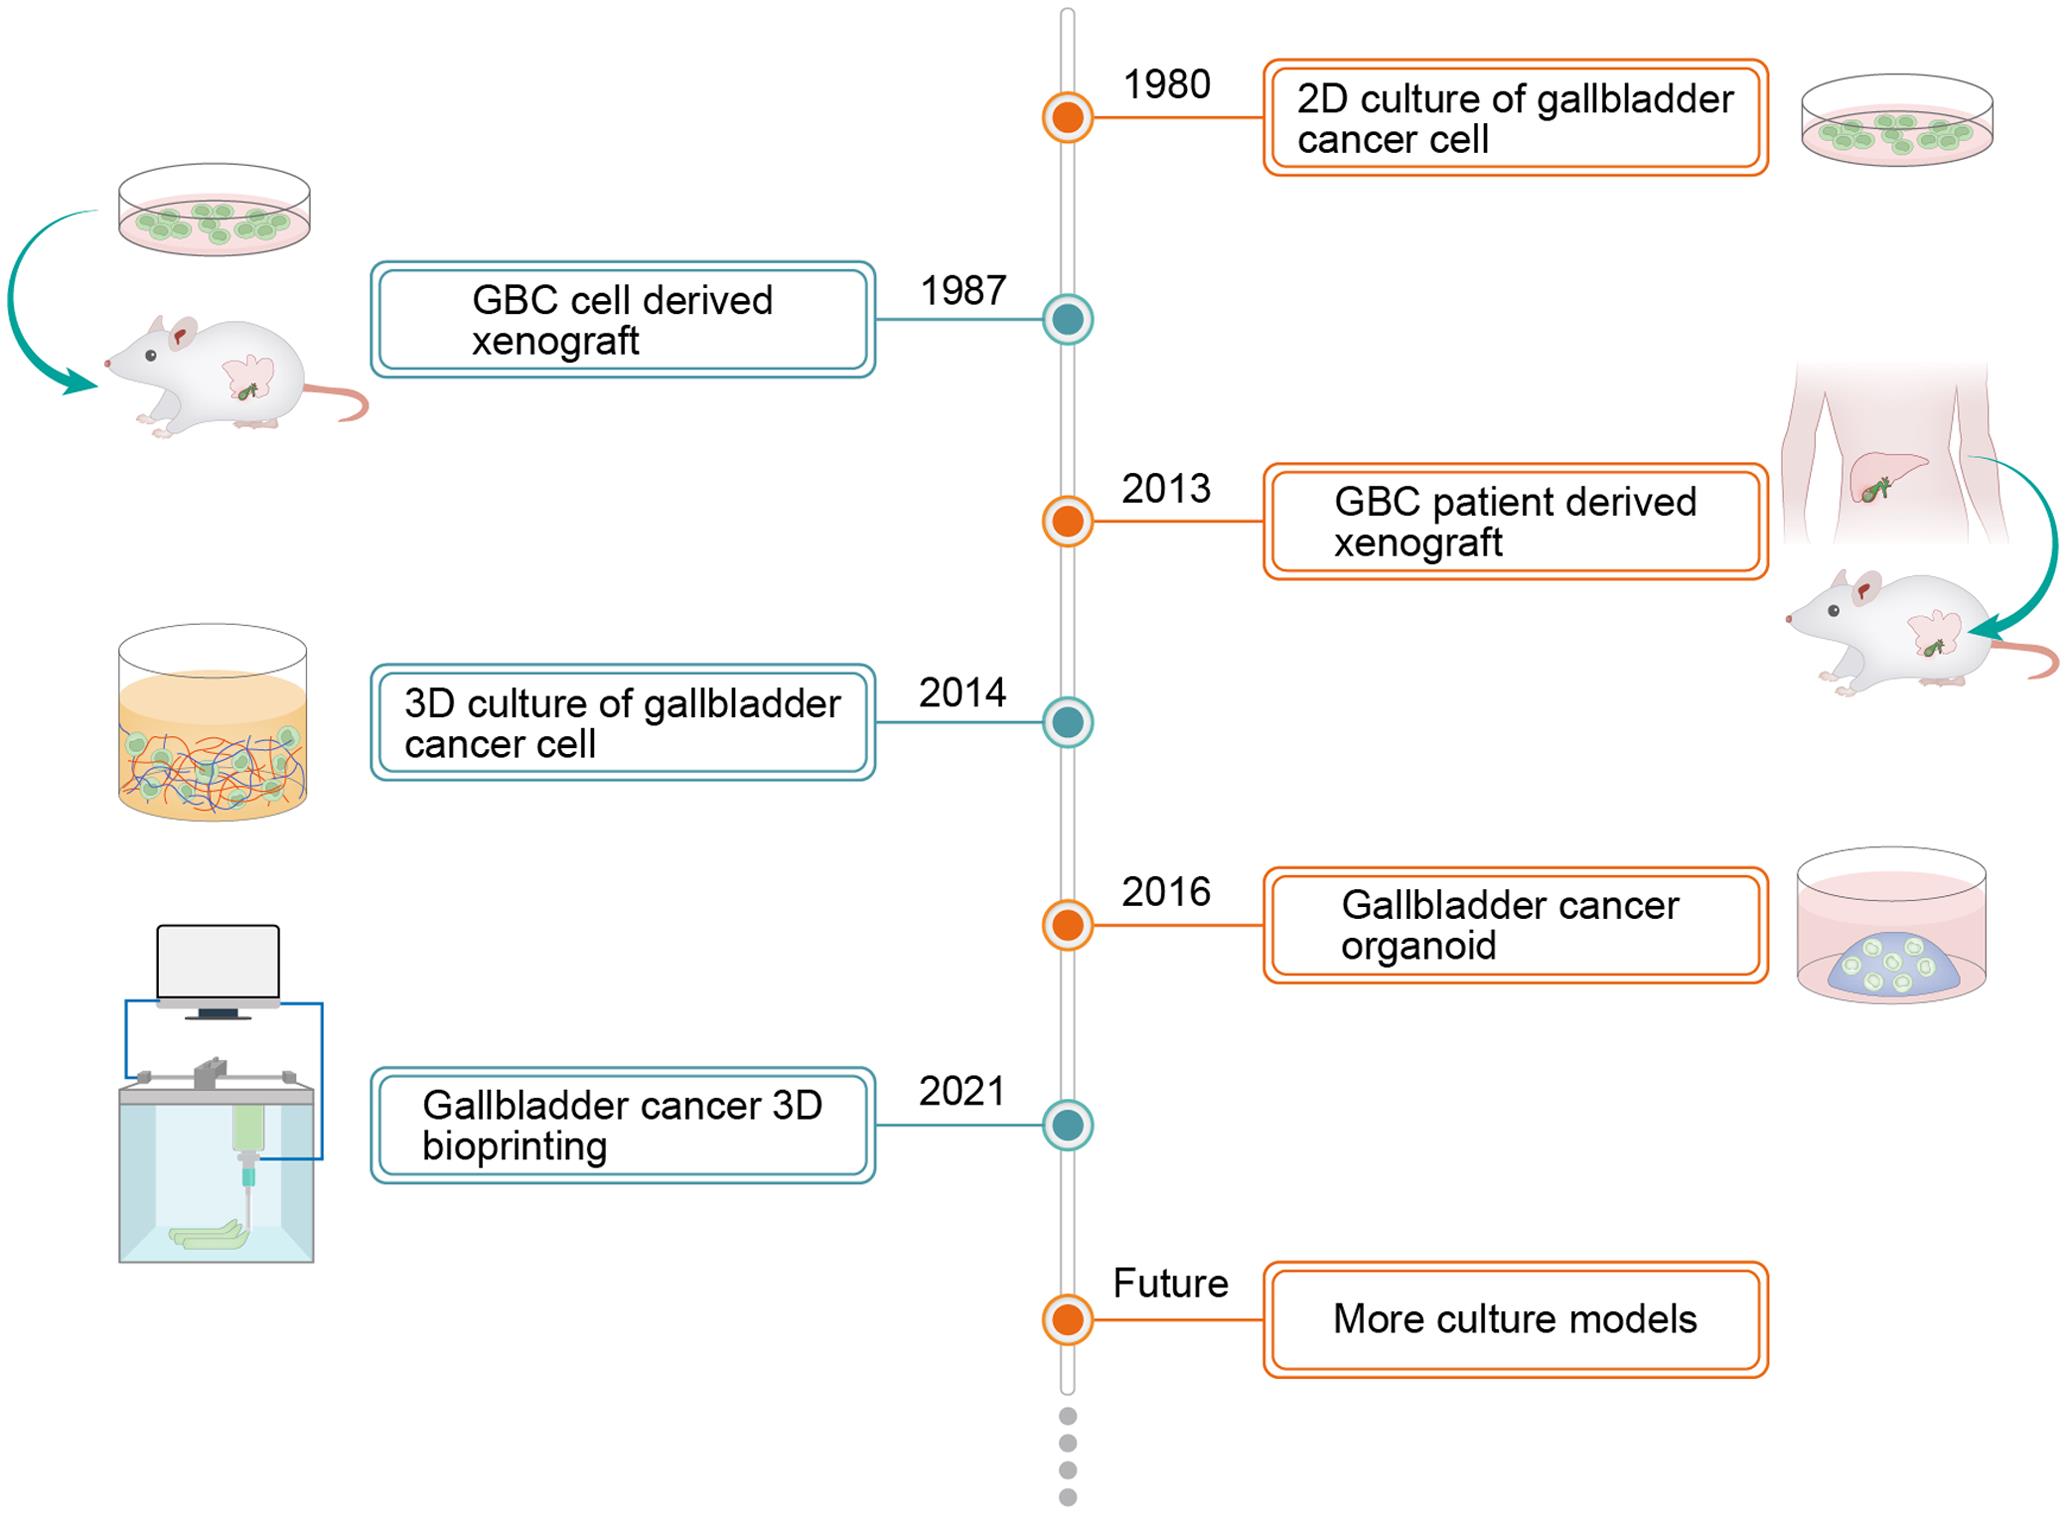 Timeline of the development of different models of gallbladder cancer cell culture.